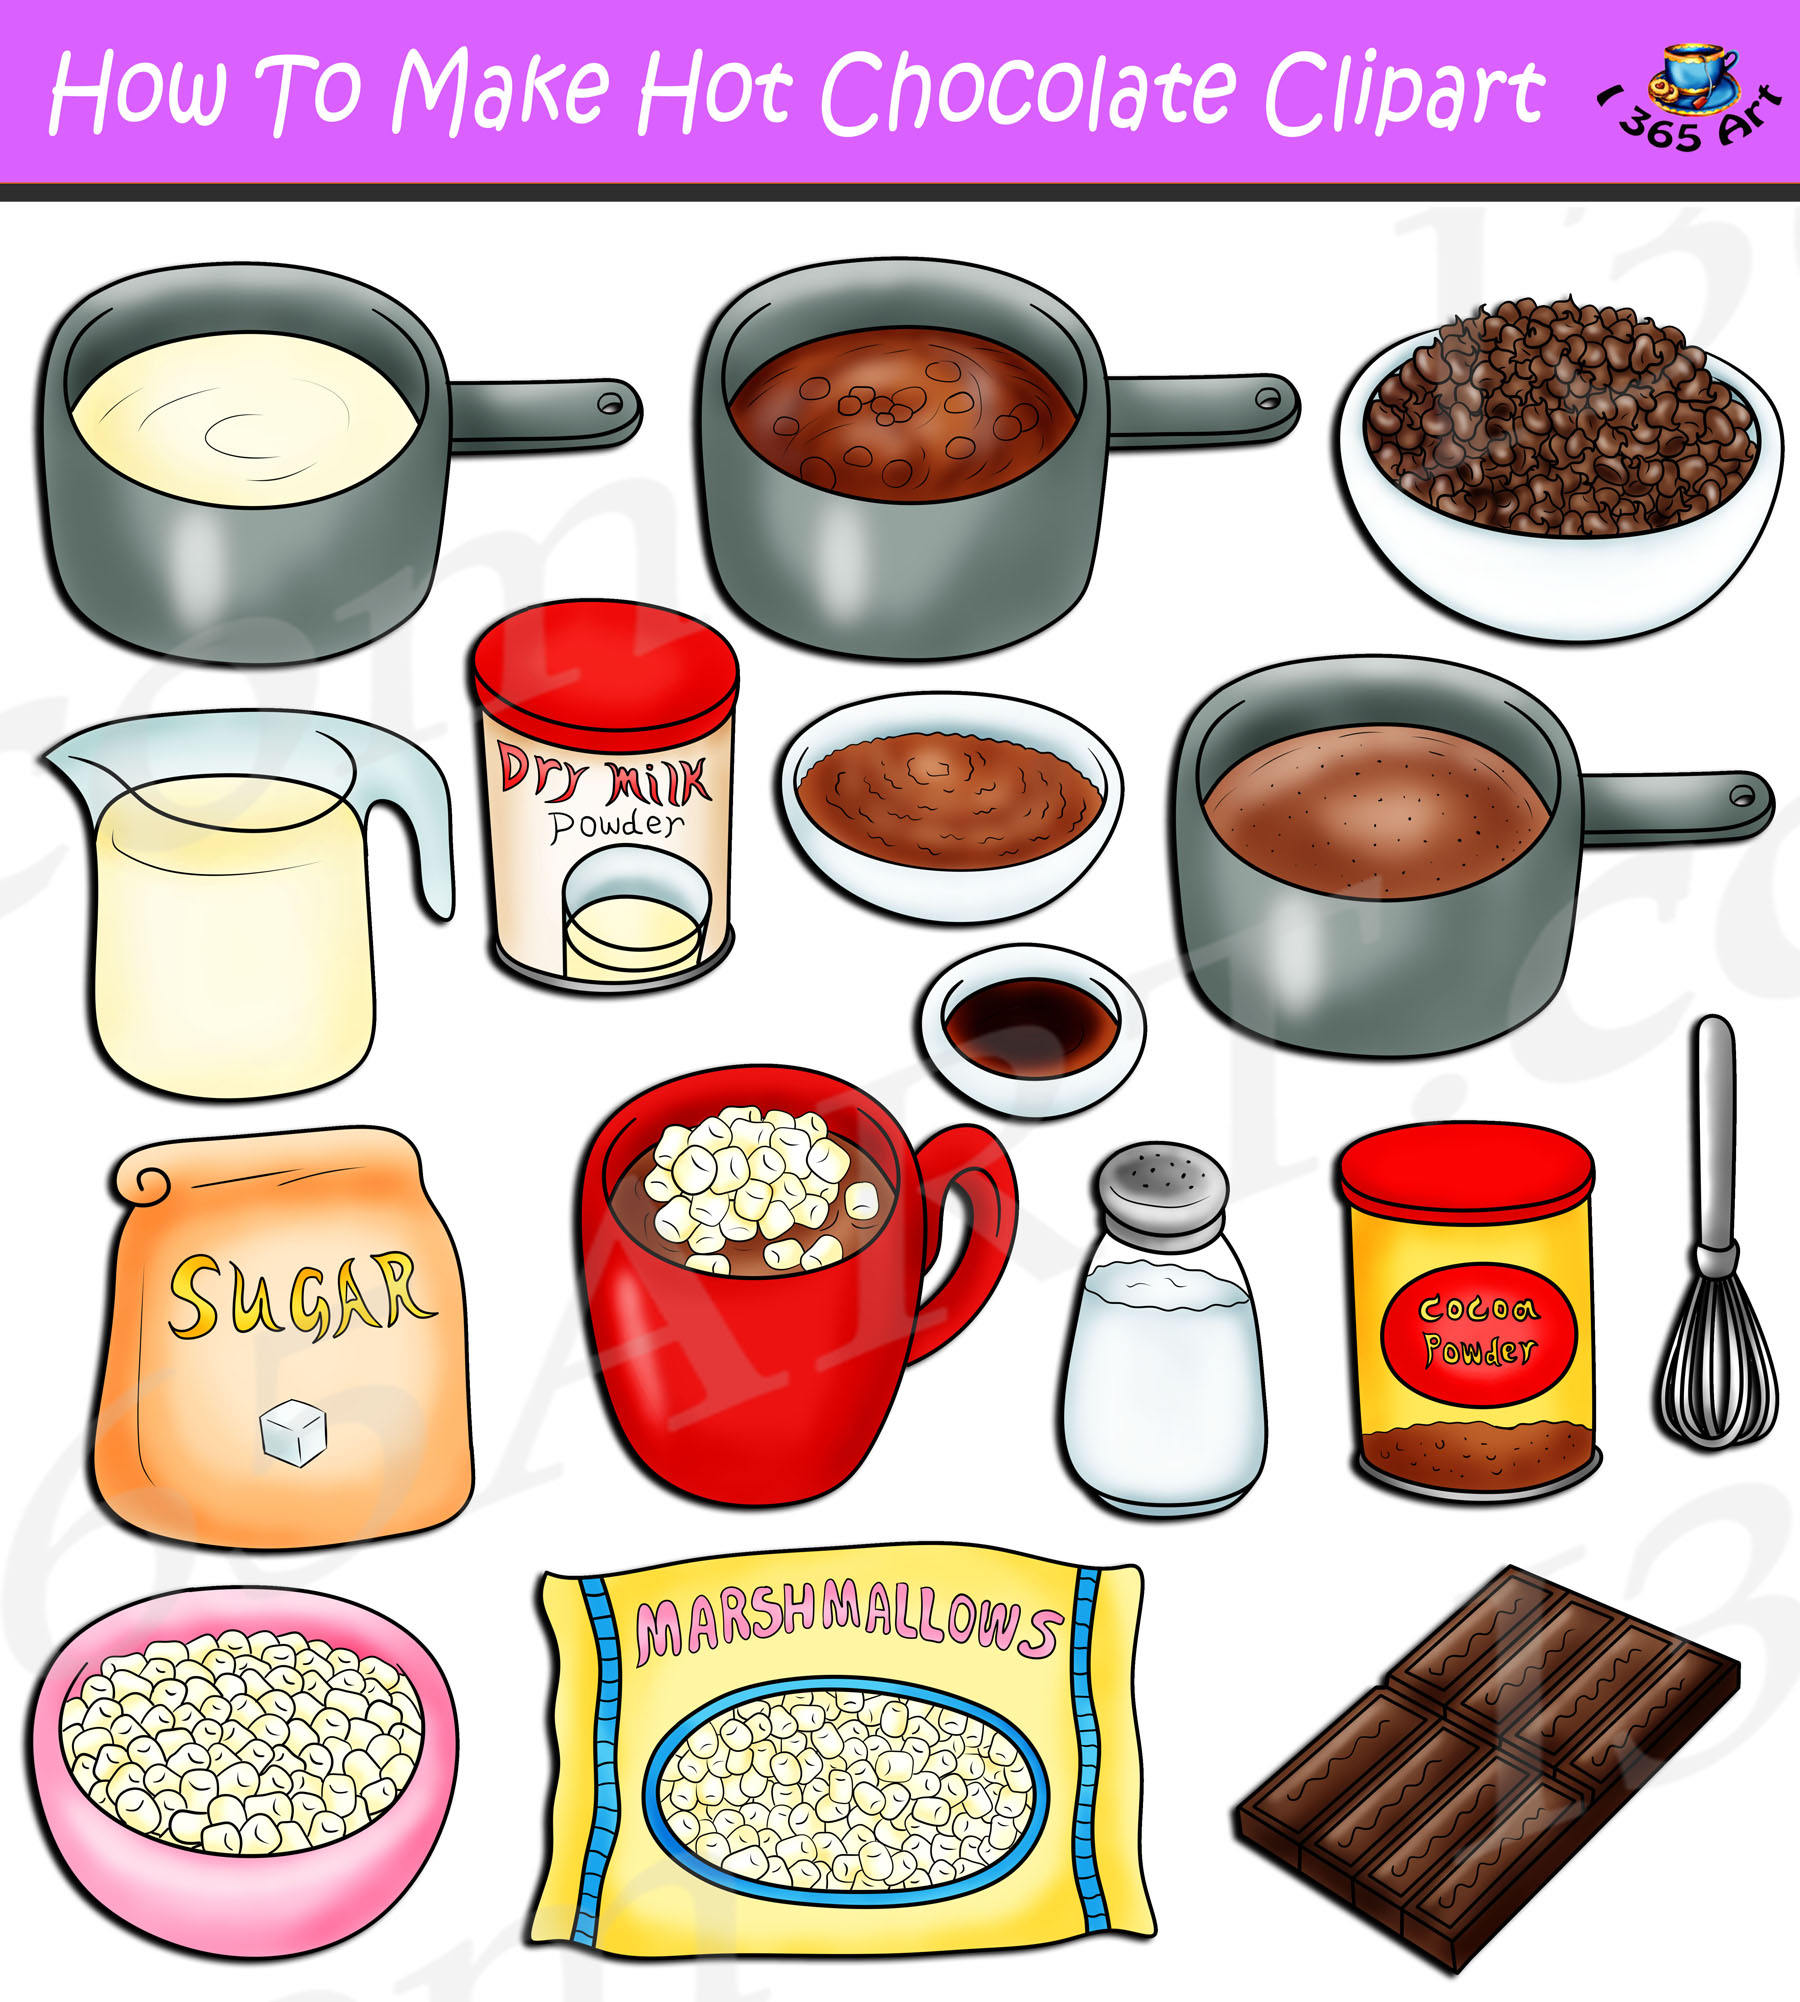 https://clipart4school.com/wp-content/uploads/2023/04/How-to-make-hot-chocolate-preview.jpg